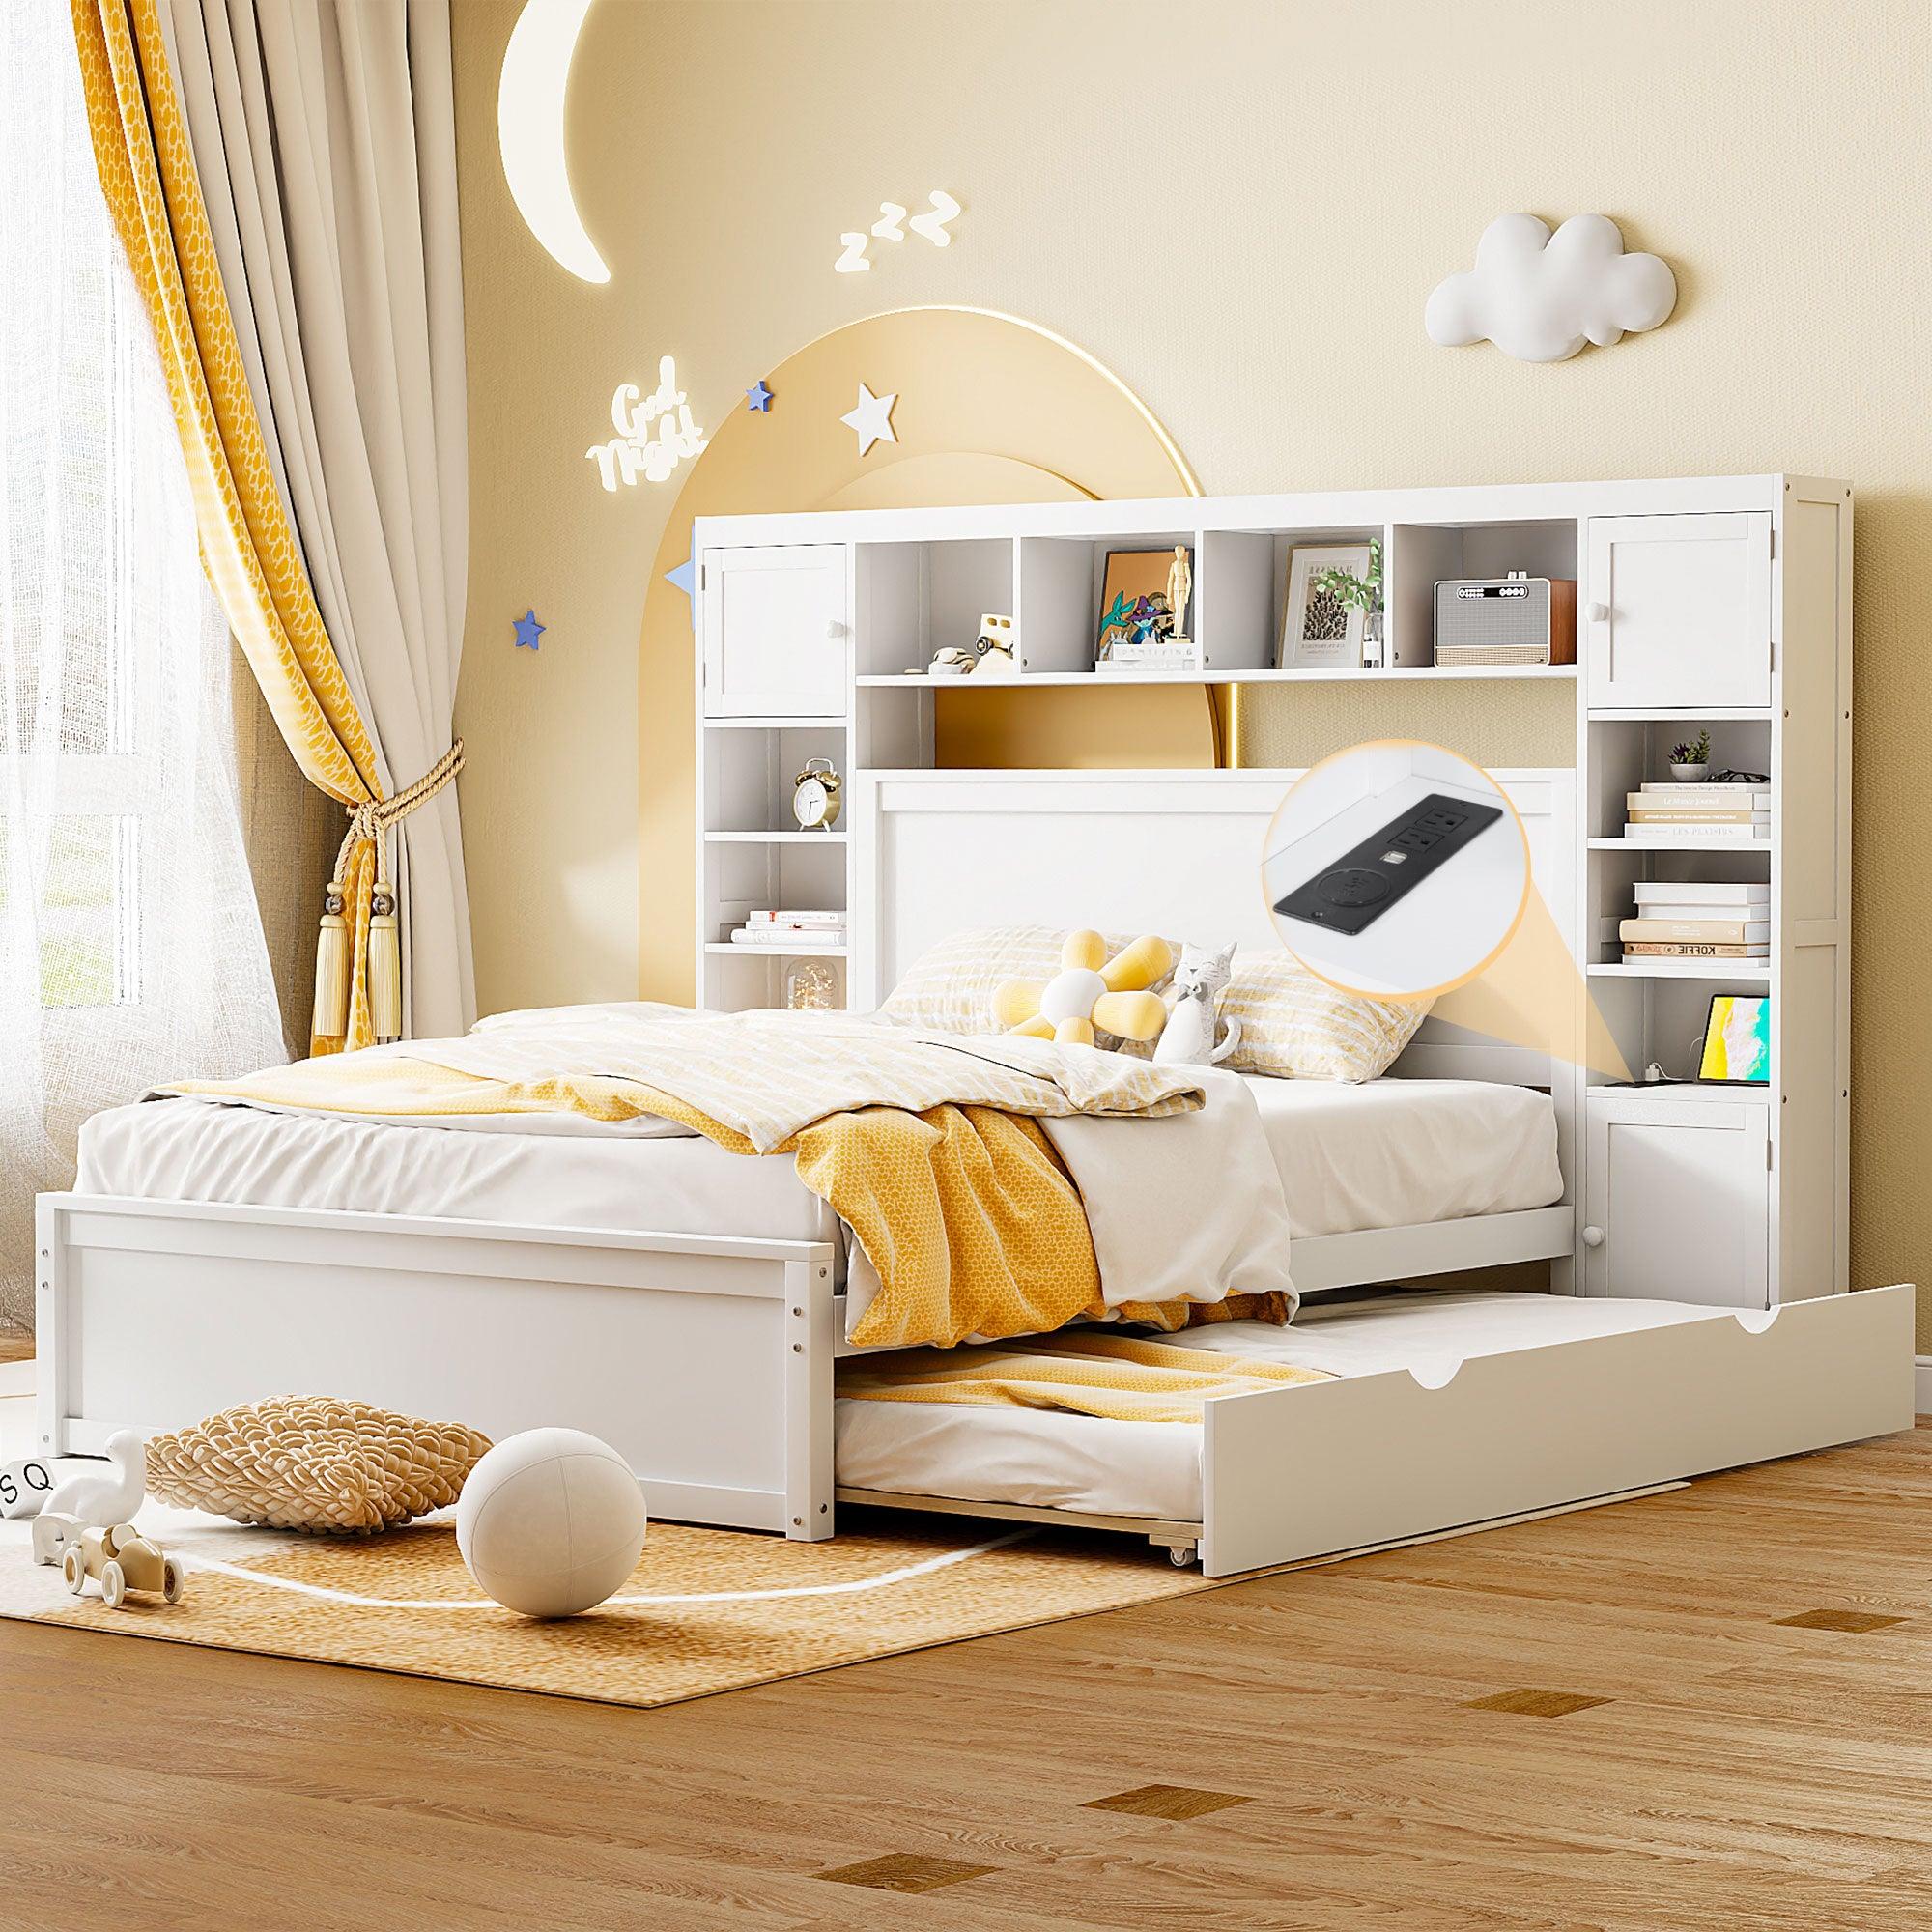 🆓🚛 Queen Size Wooden Bed With All-in-One Cabinet, Shelf & Sockets, White